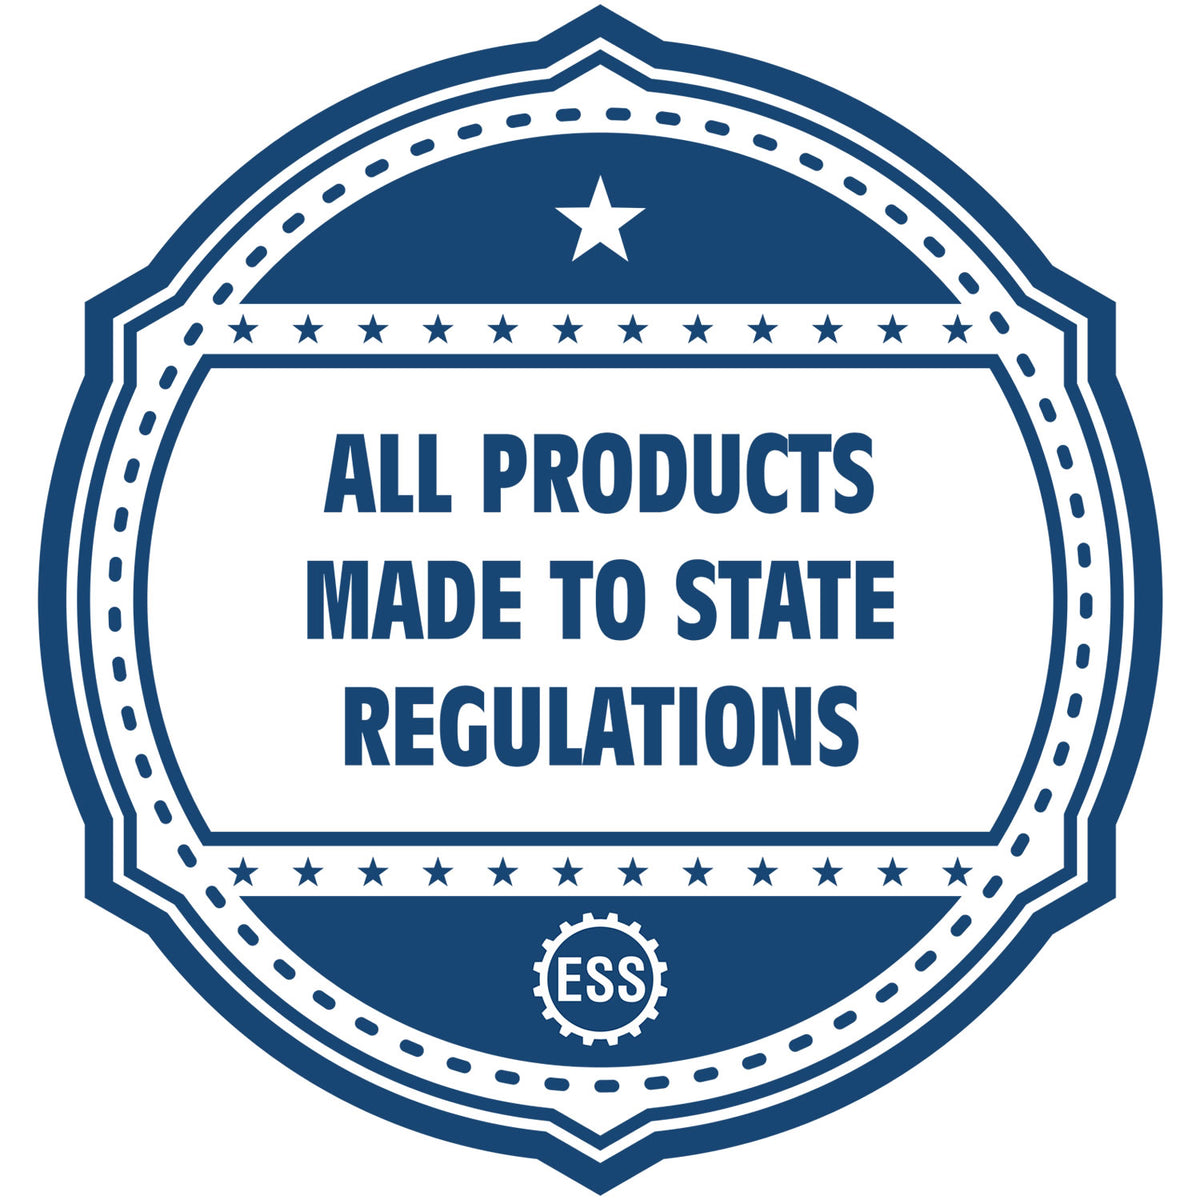 A blue icon or badge for the District of Columbia Professional Geologist Seal Stamp showing that this product is made in compliance with state regulations.